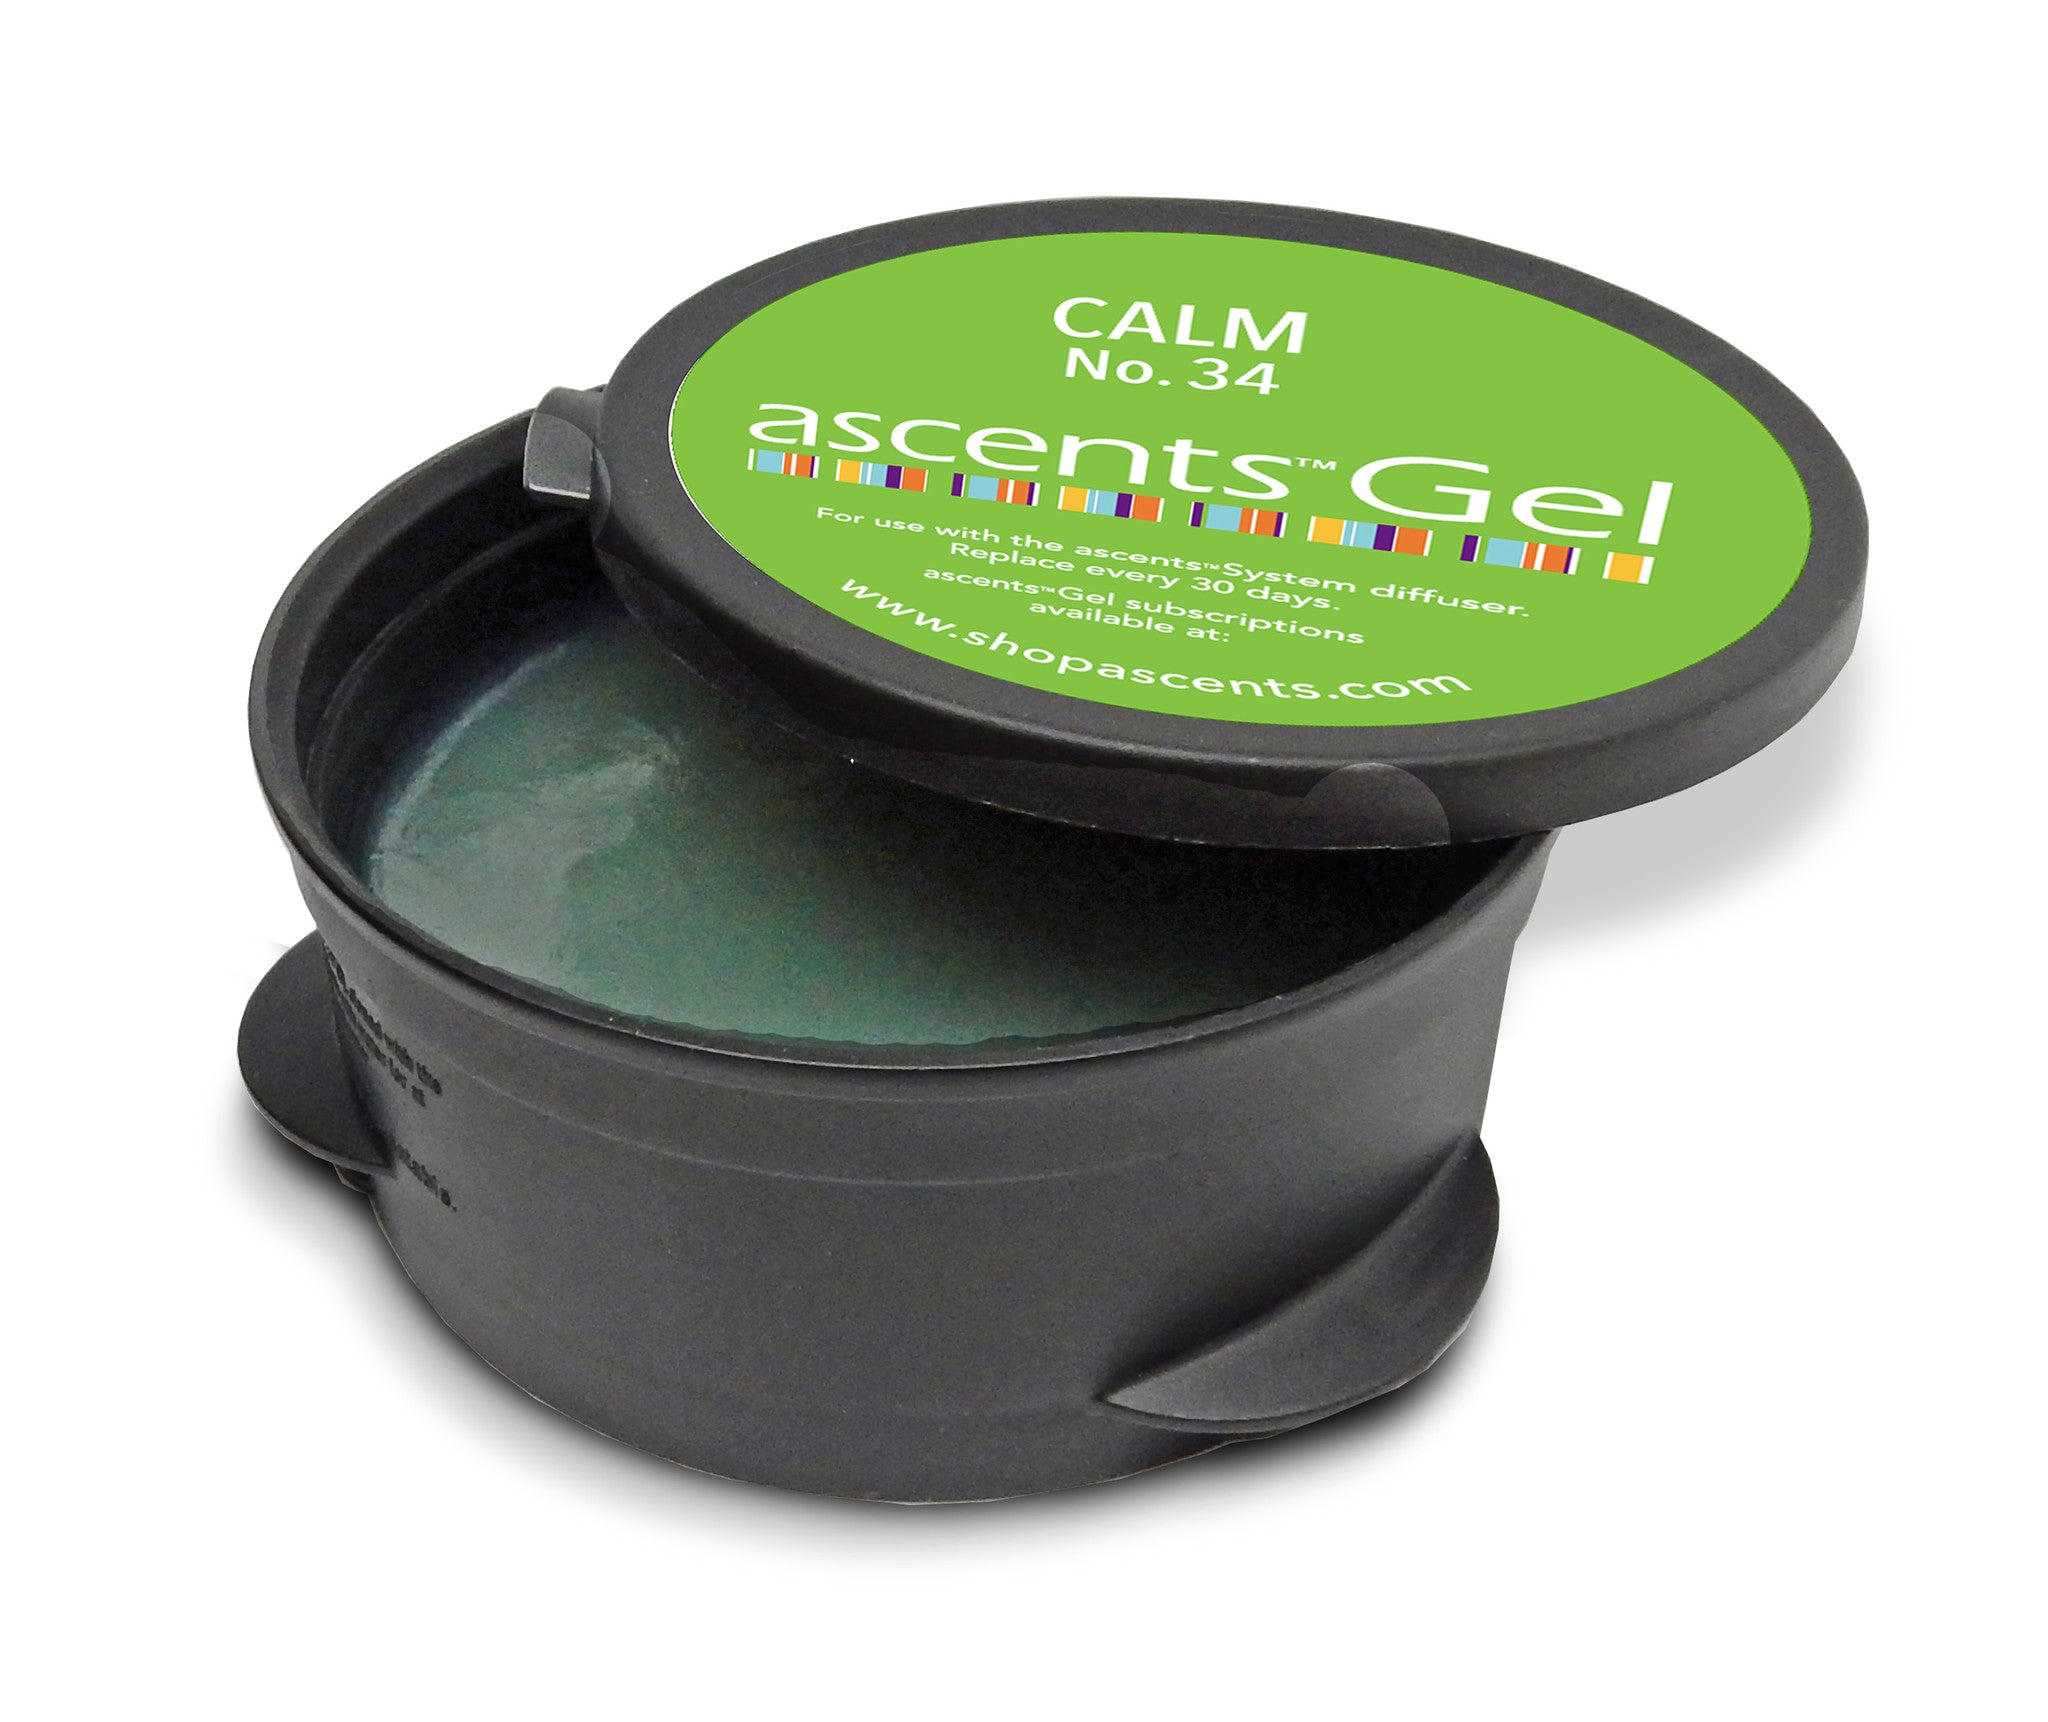 Calm Gel - For Stress & Anxiety